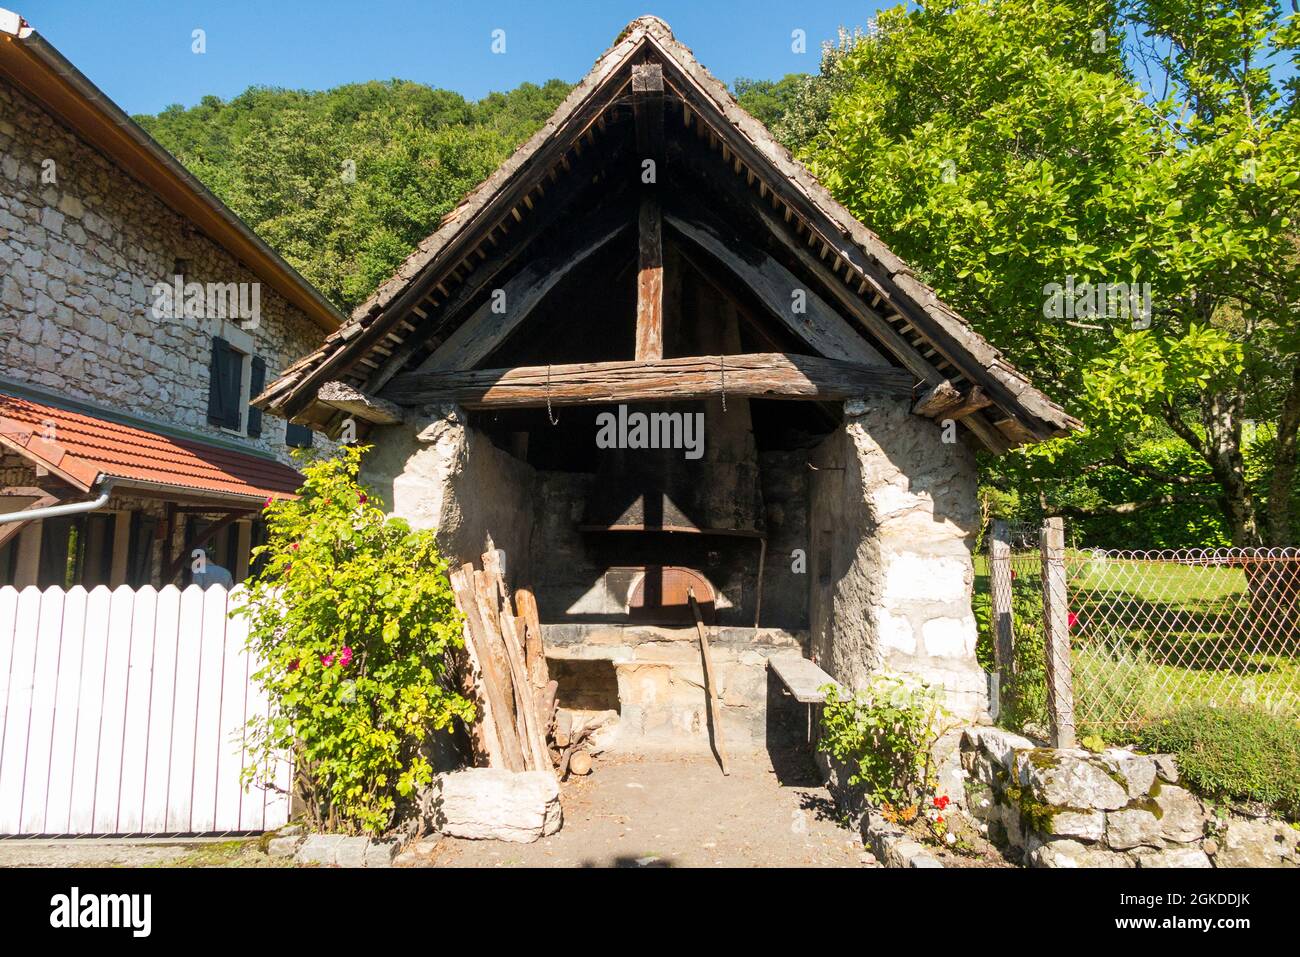 The four banal (English: common oven) was a feudal institution in medieval  France used by French villagers to cook bake bread. Chanaz, SE France (127  Stock Photo - Alamy